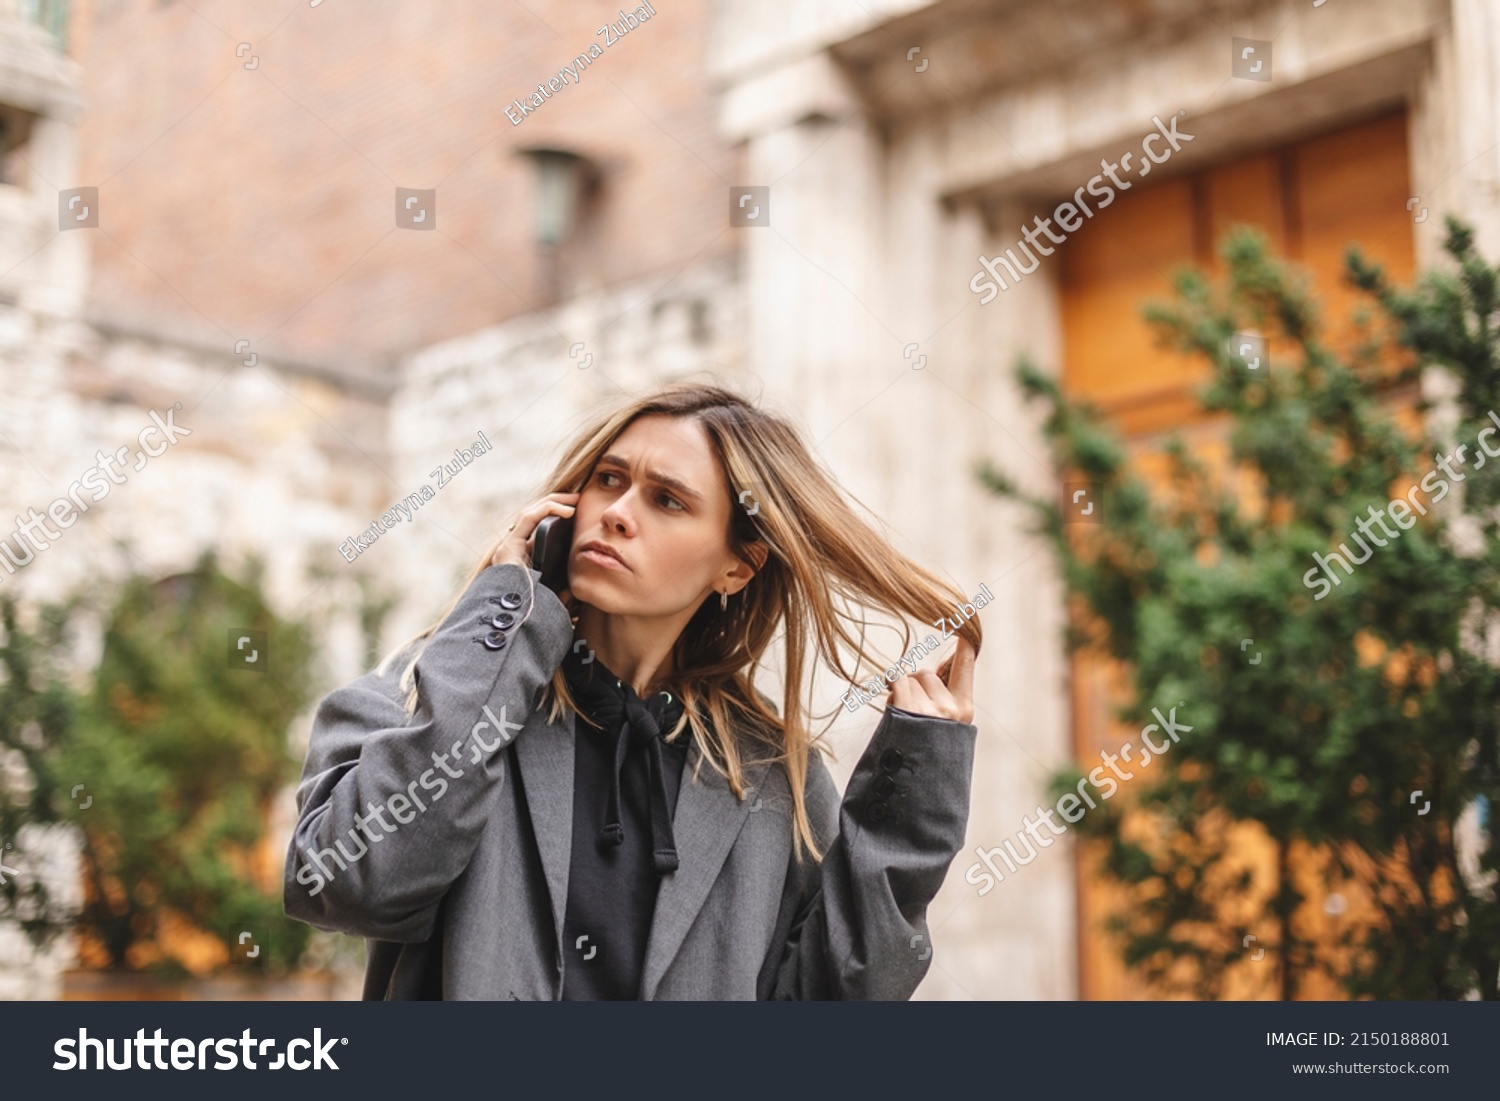 Upset woman. Woman talking sad by the bad news she hear on the cell mobile phone. Gloomy girl short hair wear grey suit and twisting a lock of hair on her finger. #2150188801